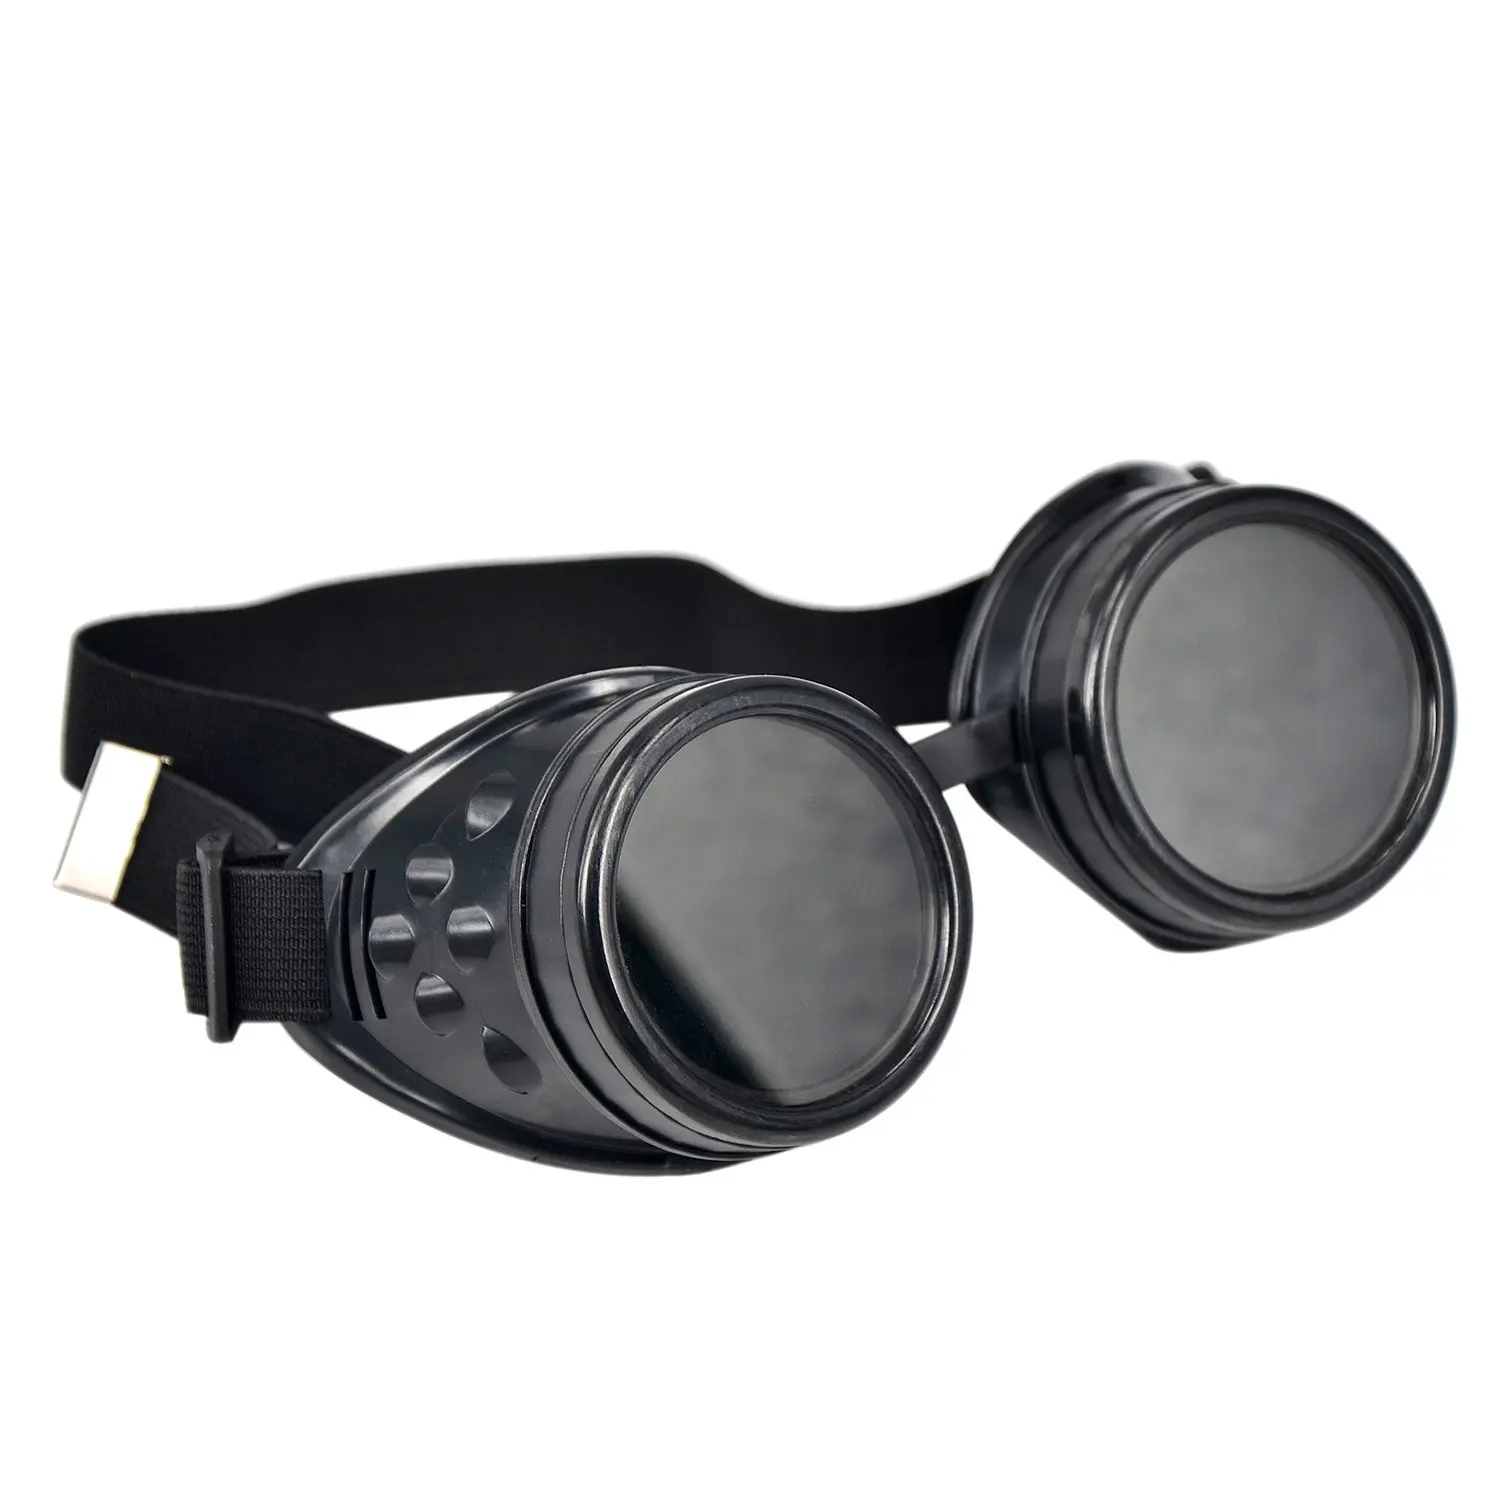 

HOT Cyber Goggles Steampunk Welding Goth Cosplay Vintage Goggles Rustic-Black & Black